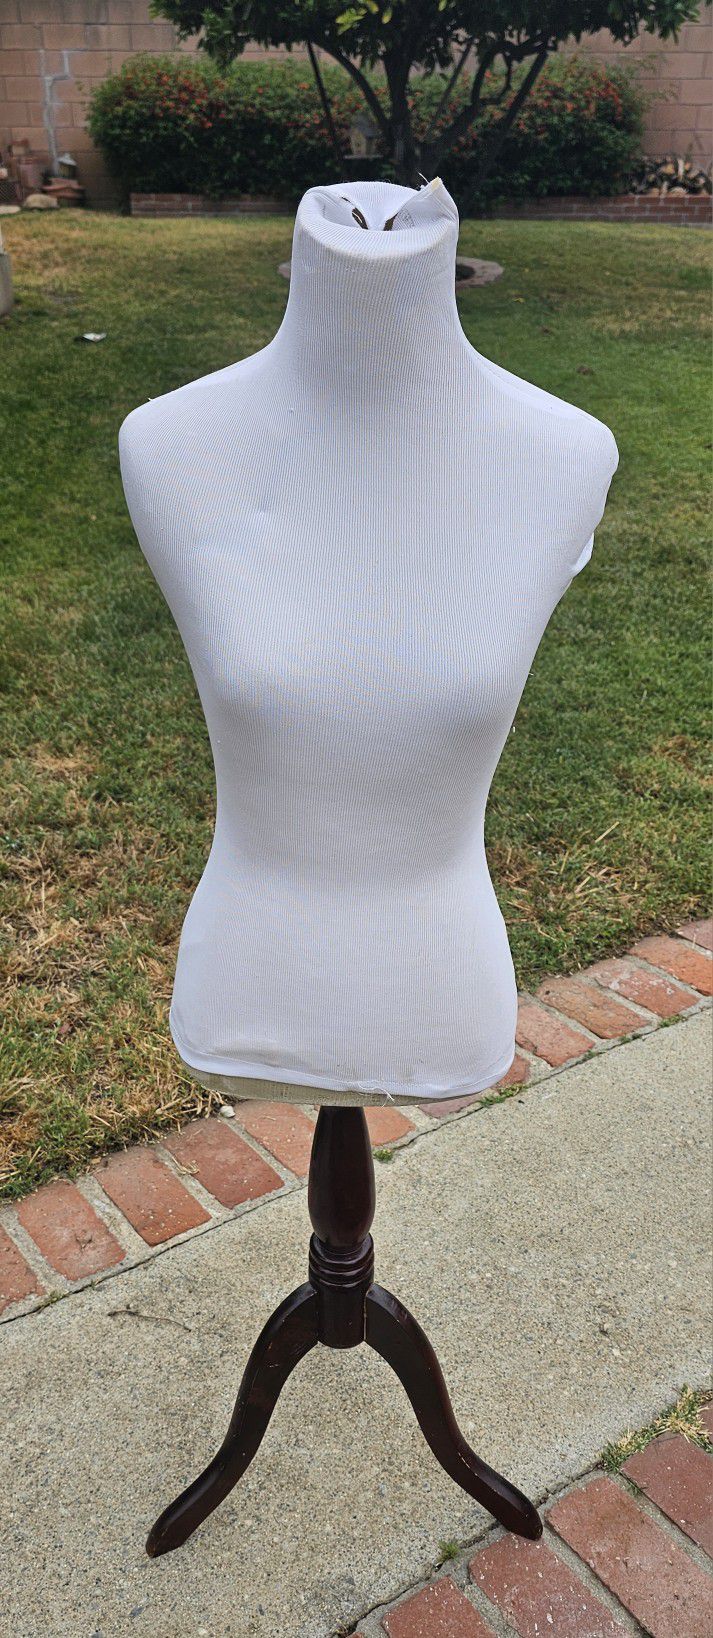 Dress Form - Female Mannequin - Sewing Bust 